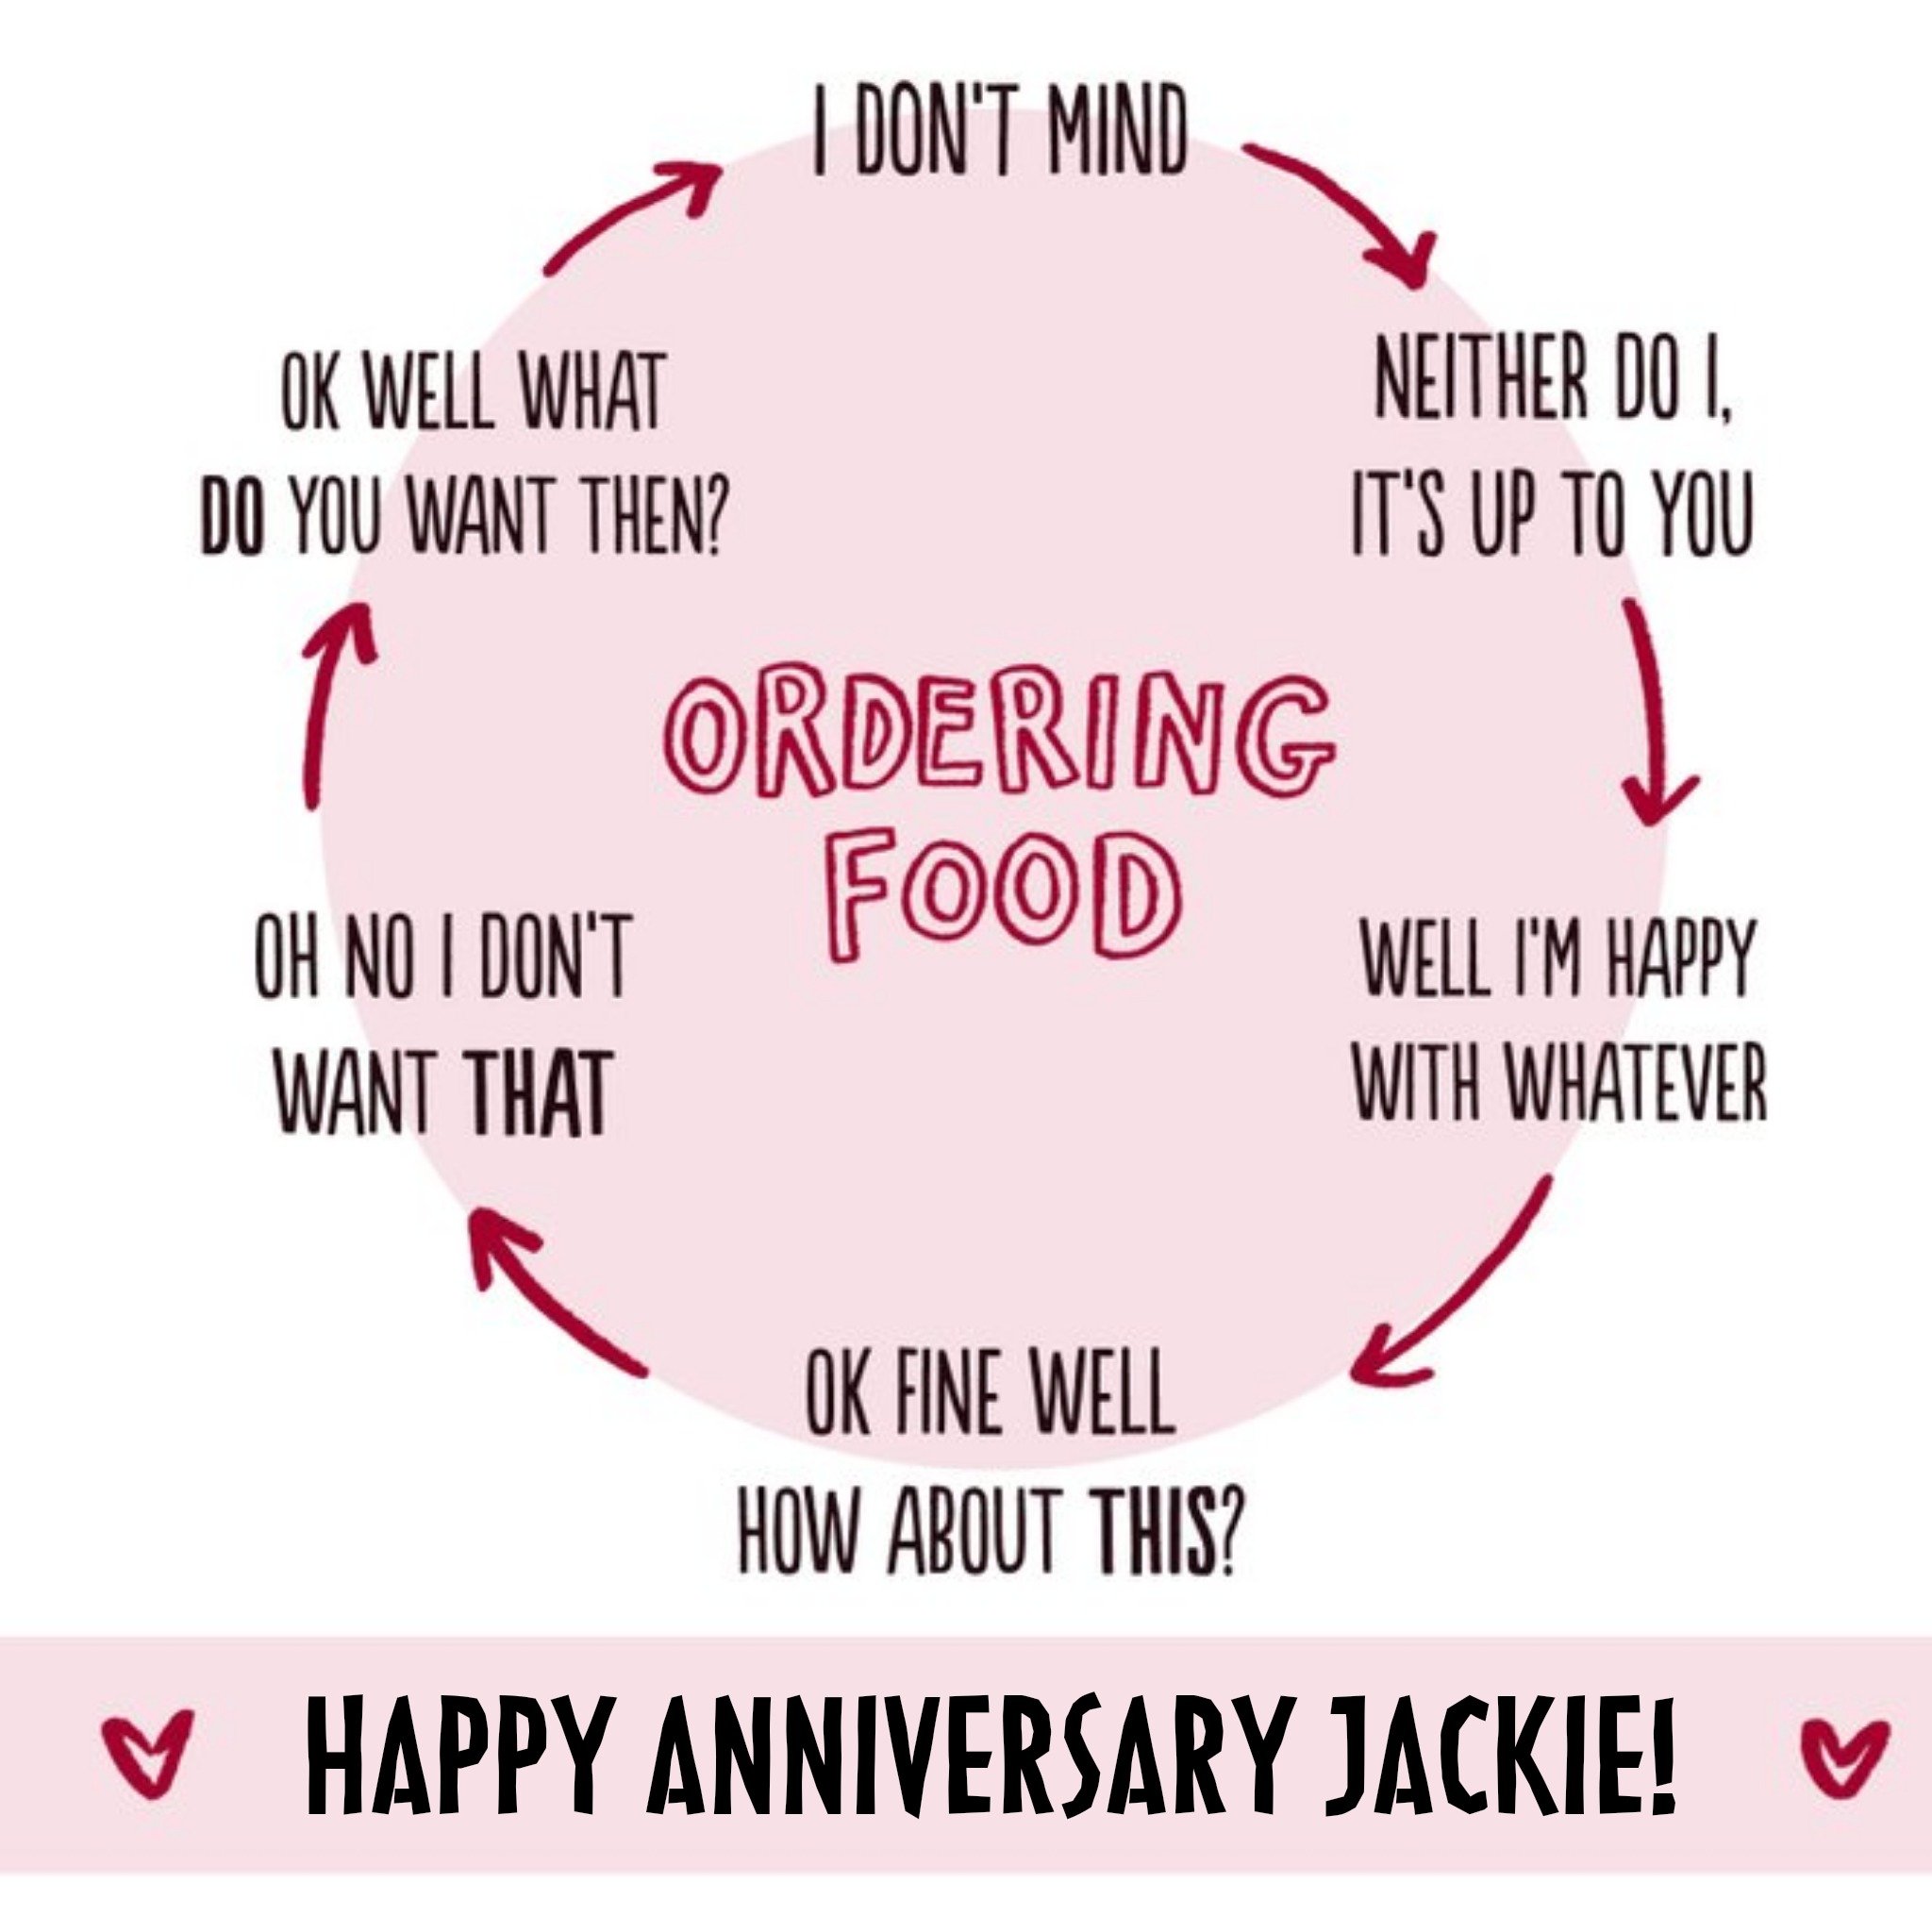 Moonpig Funny Flow Diagram About Ordering Food With Your Partner Anniversary Card, Square